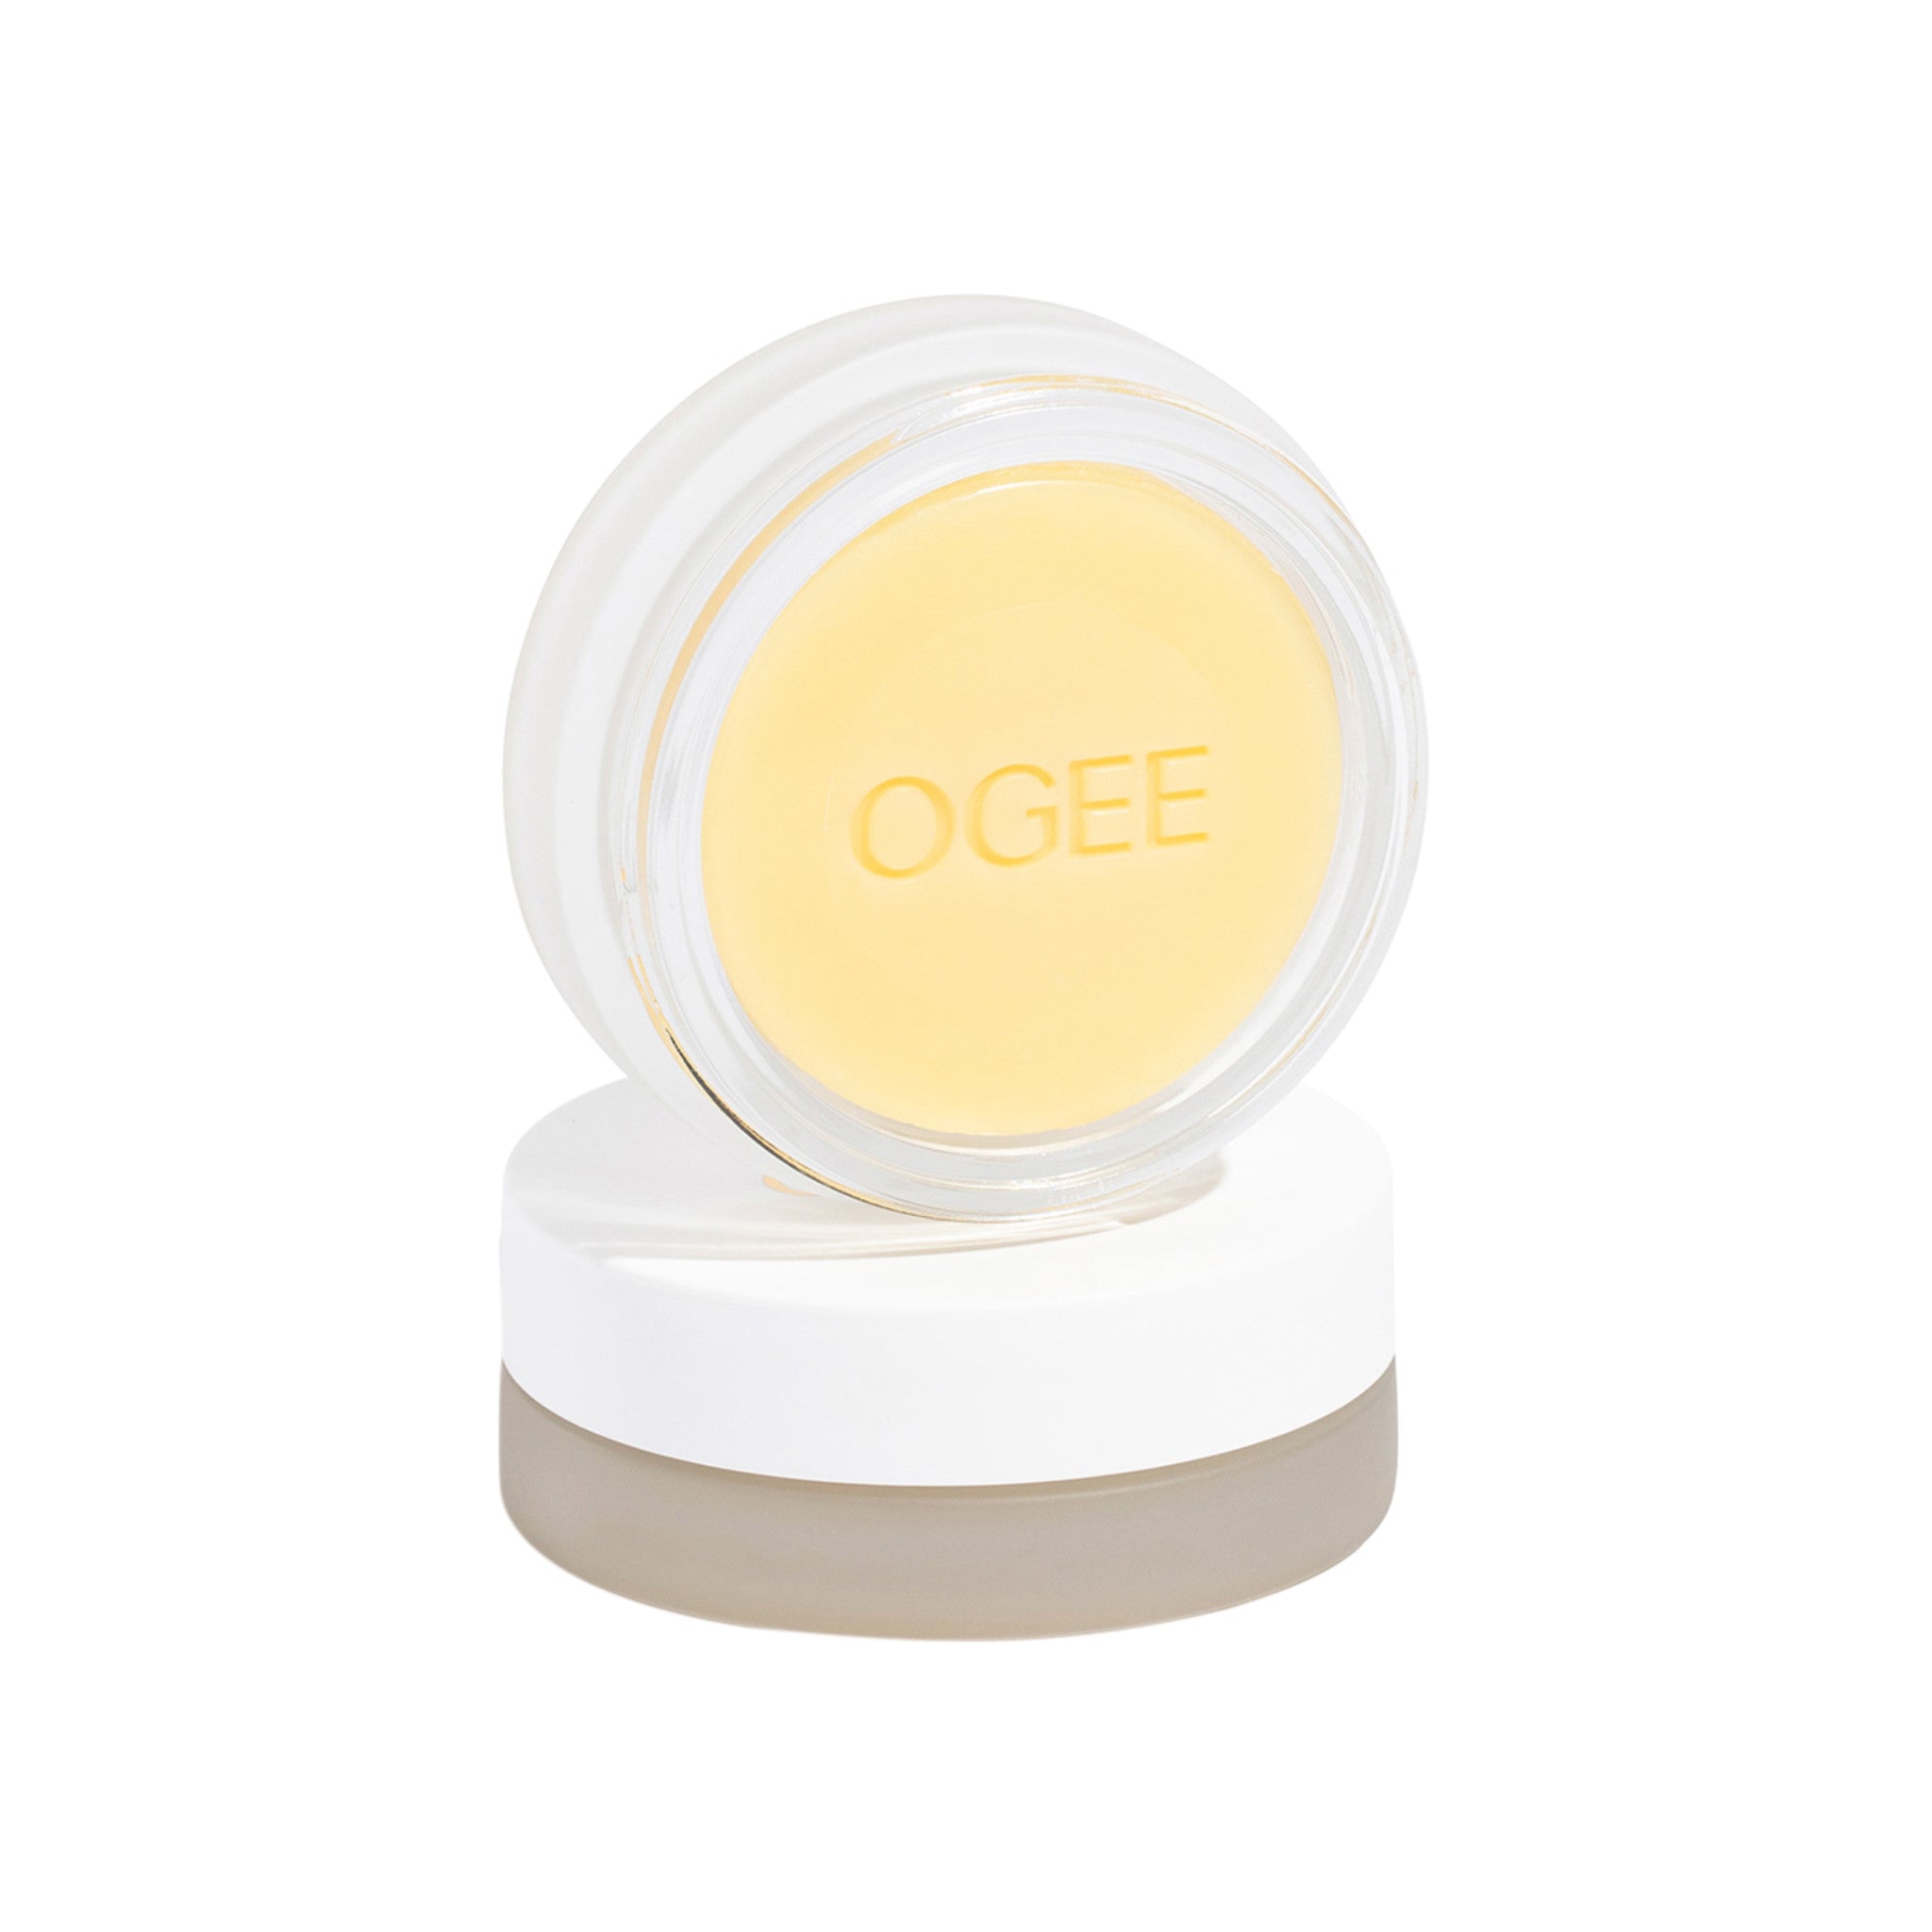 Ogee The Brush Cleanser main image.